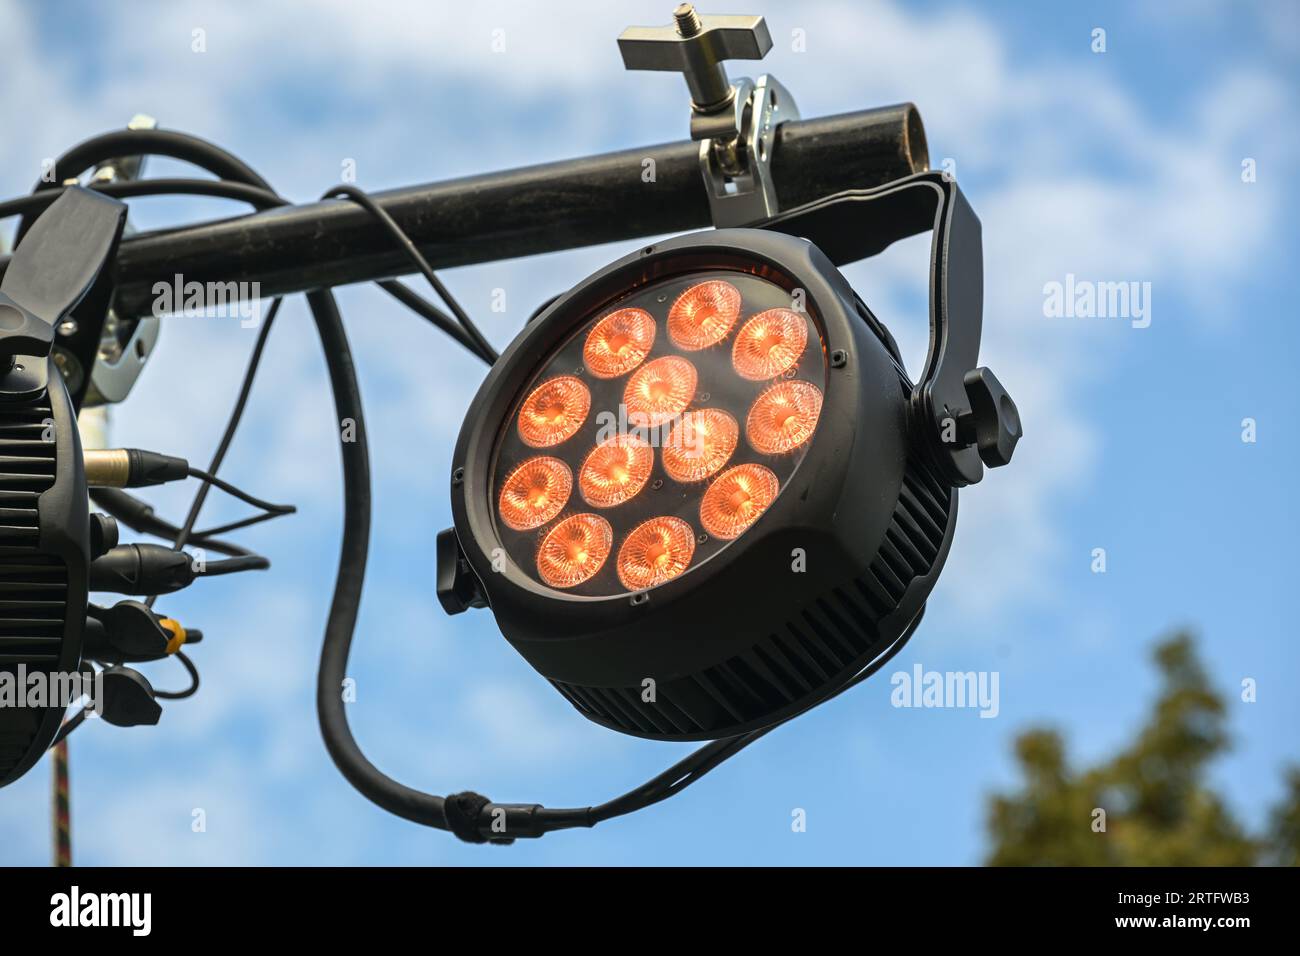 LED floodlight with RGB colors as outdoor stage lightning, installed on a black steel beam against the blue sky, used for festivals, music concerts, p Stock Photo